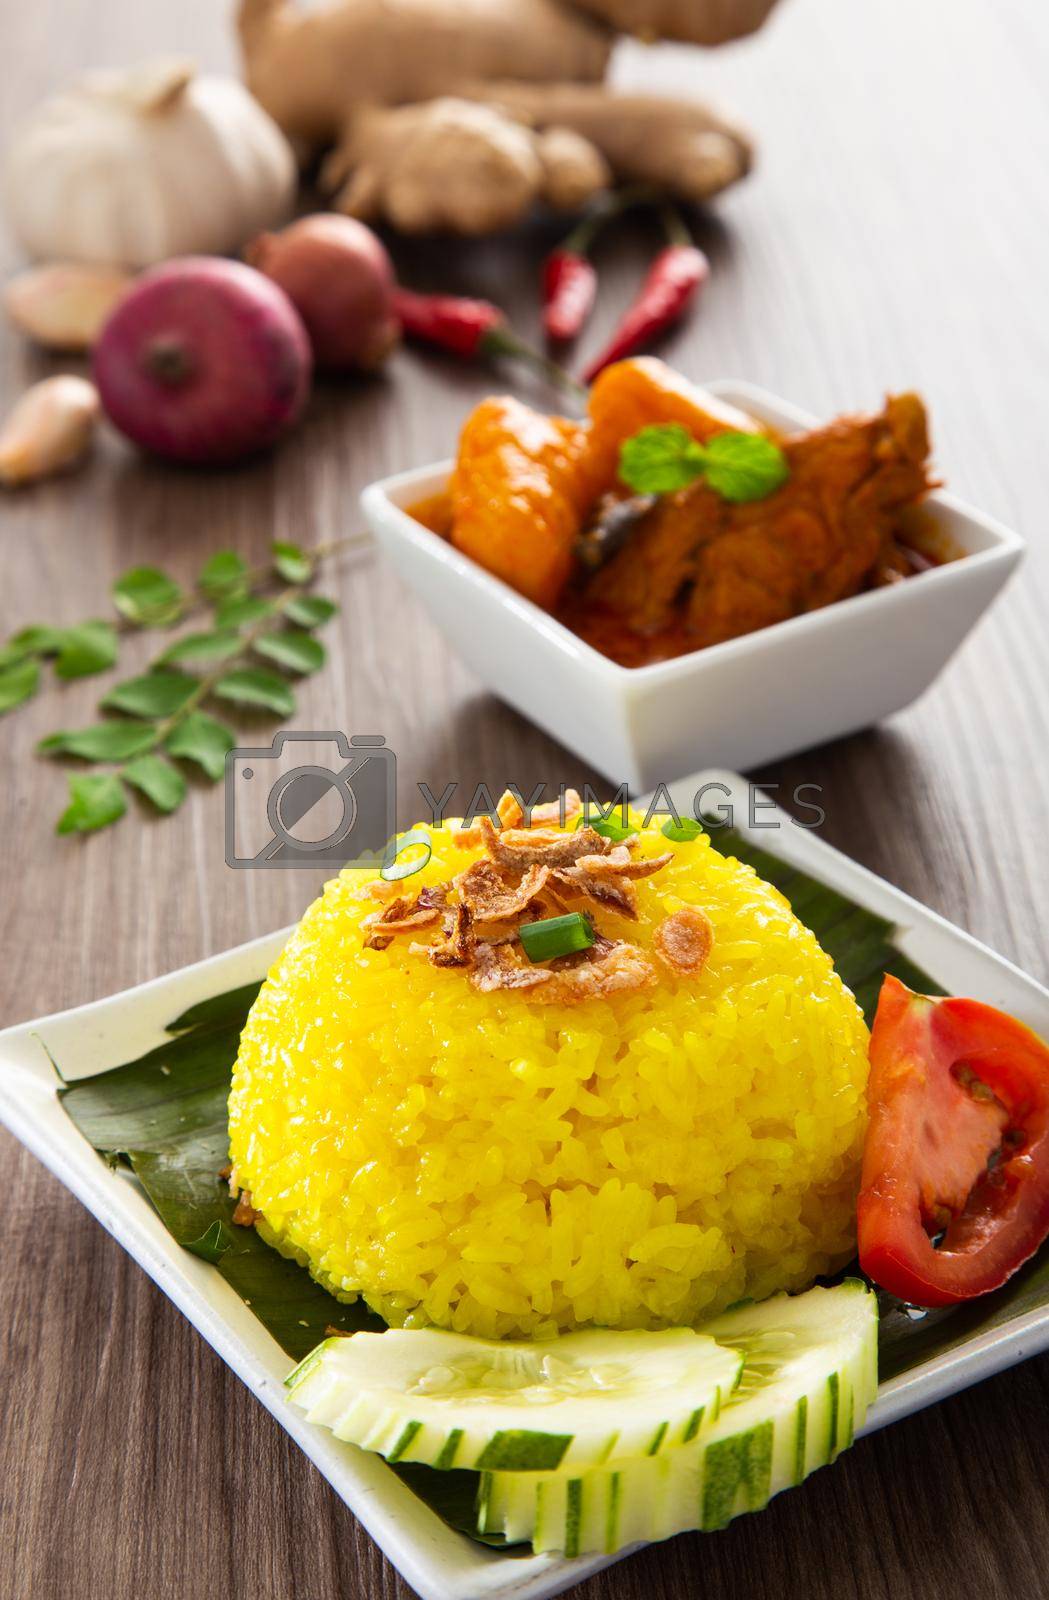 Royalty free image of Nasi Kunyit also known as Turmeric Glutinous Rice. Normally eaten with dry curry chicken. by tehcheesiong